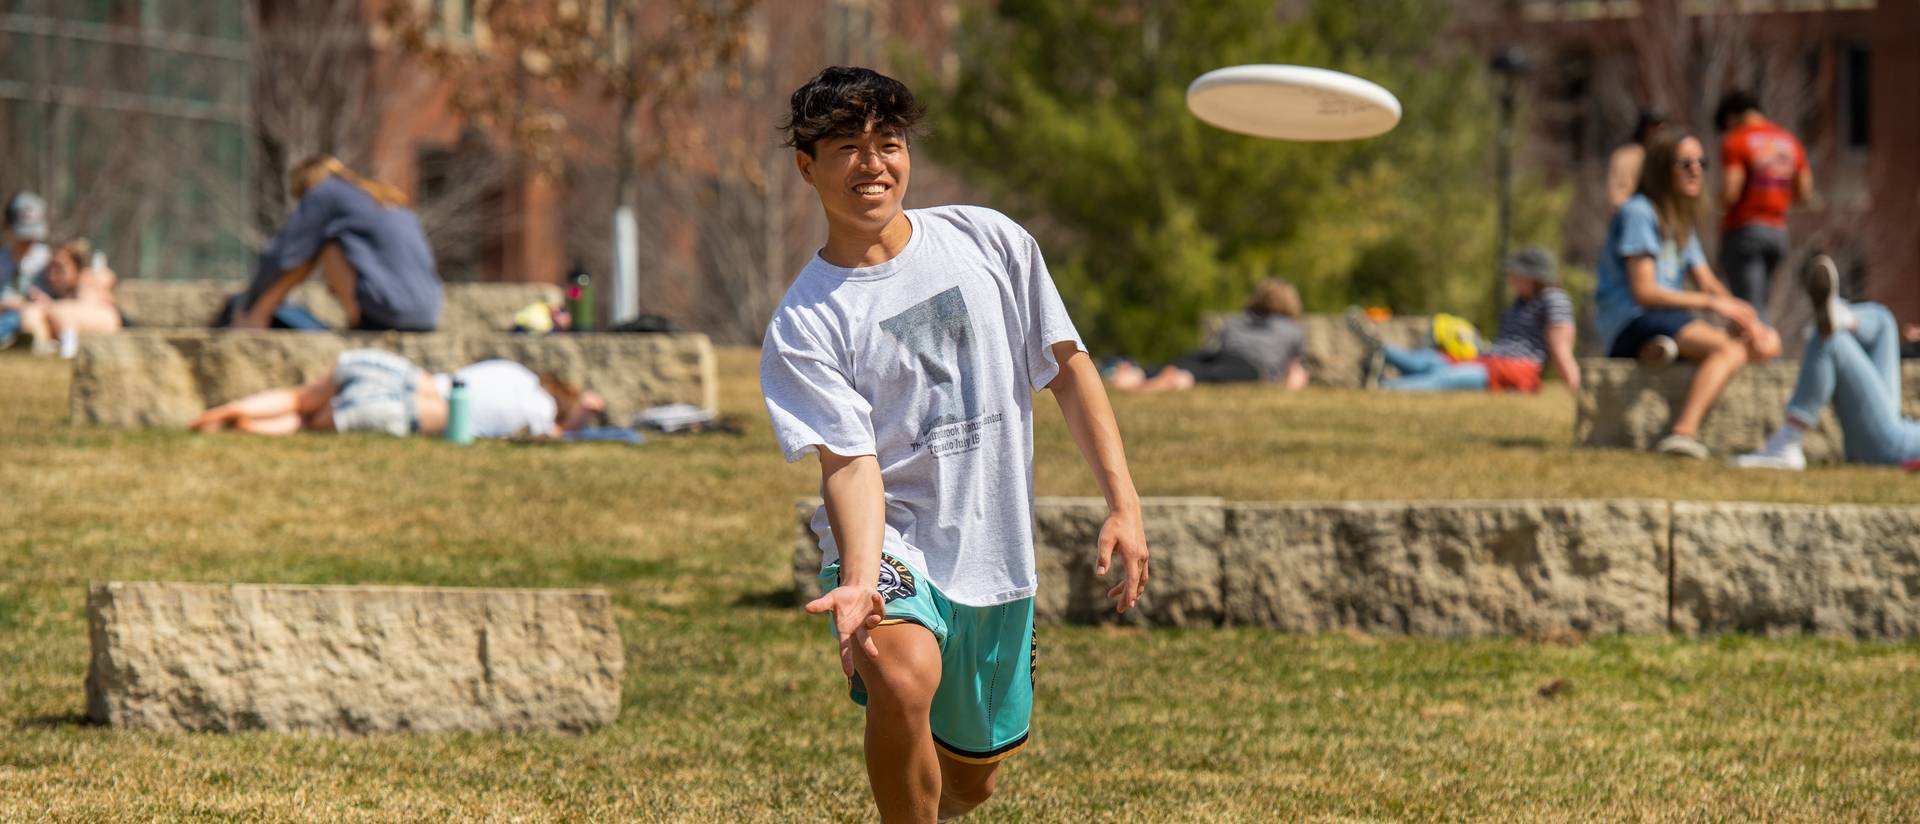 male student throwing a frisbee on campus mall lawn